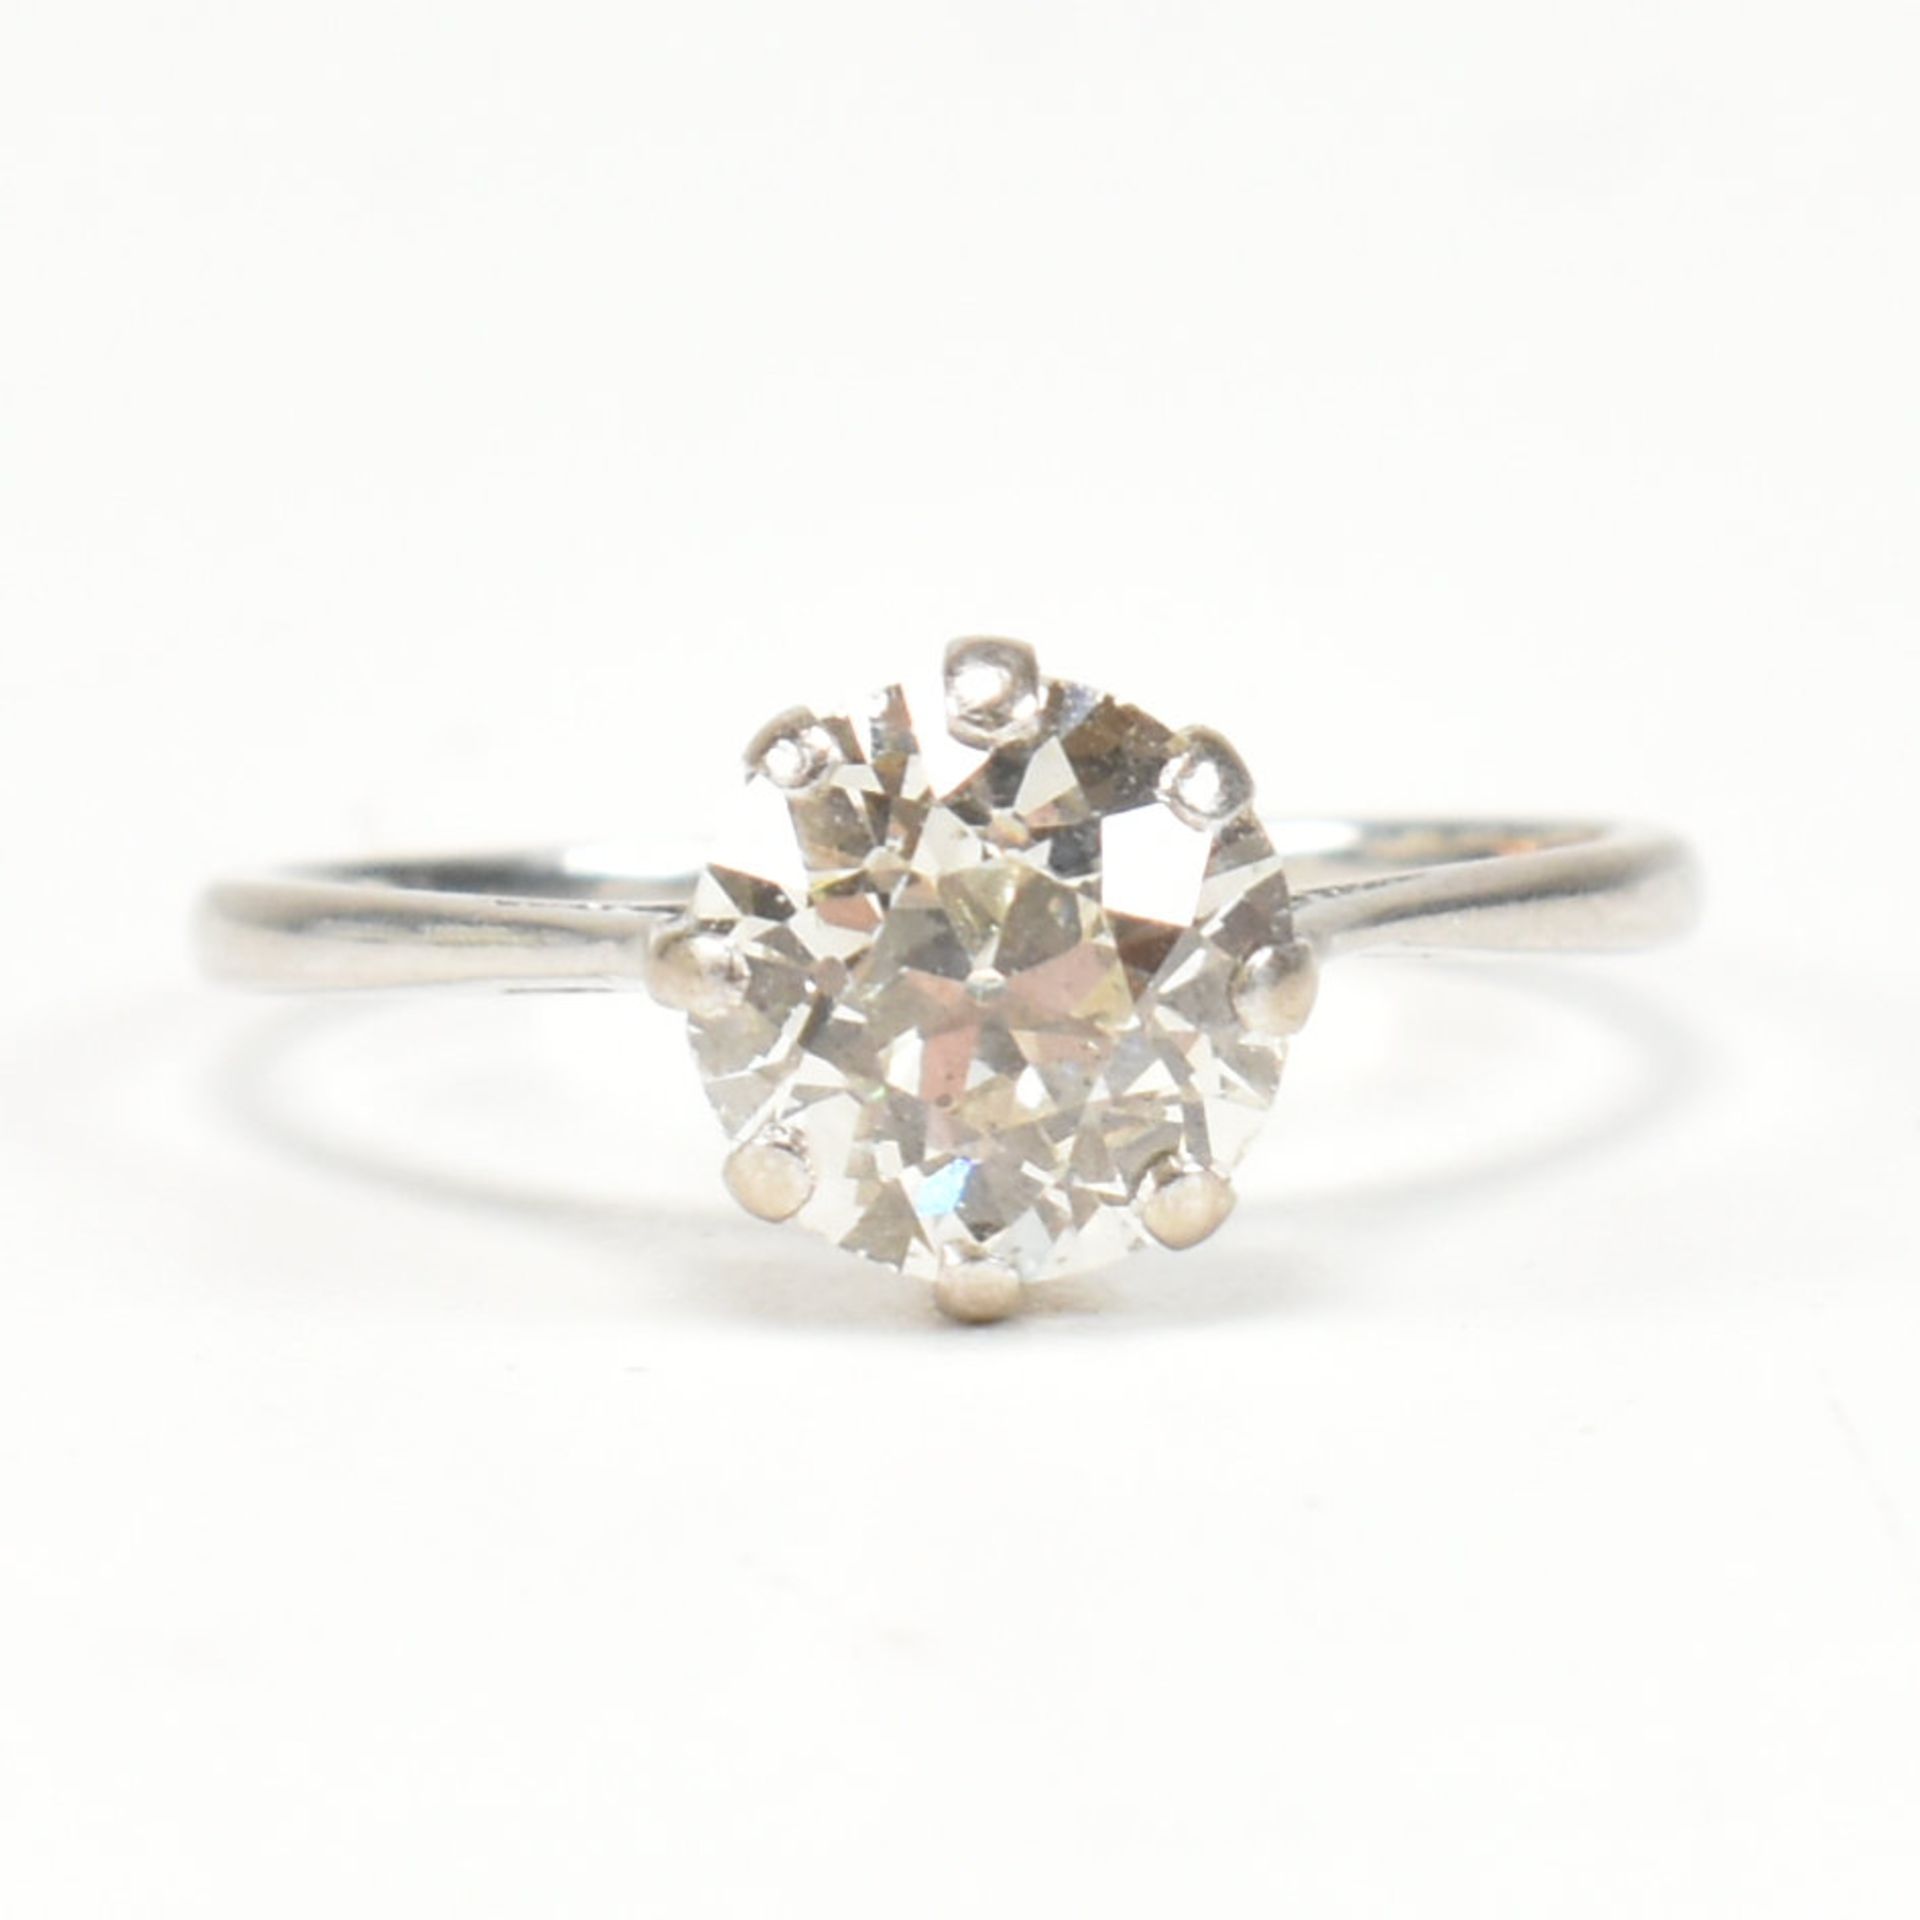 1930S 1.7CT DIAMOND SOLITAIRE RING - Image 2 of 9